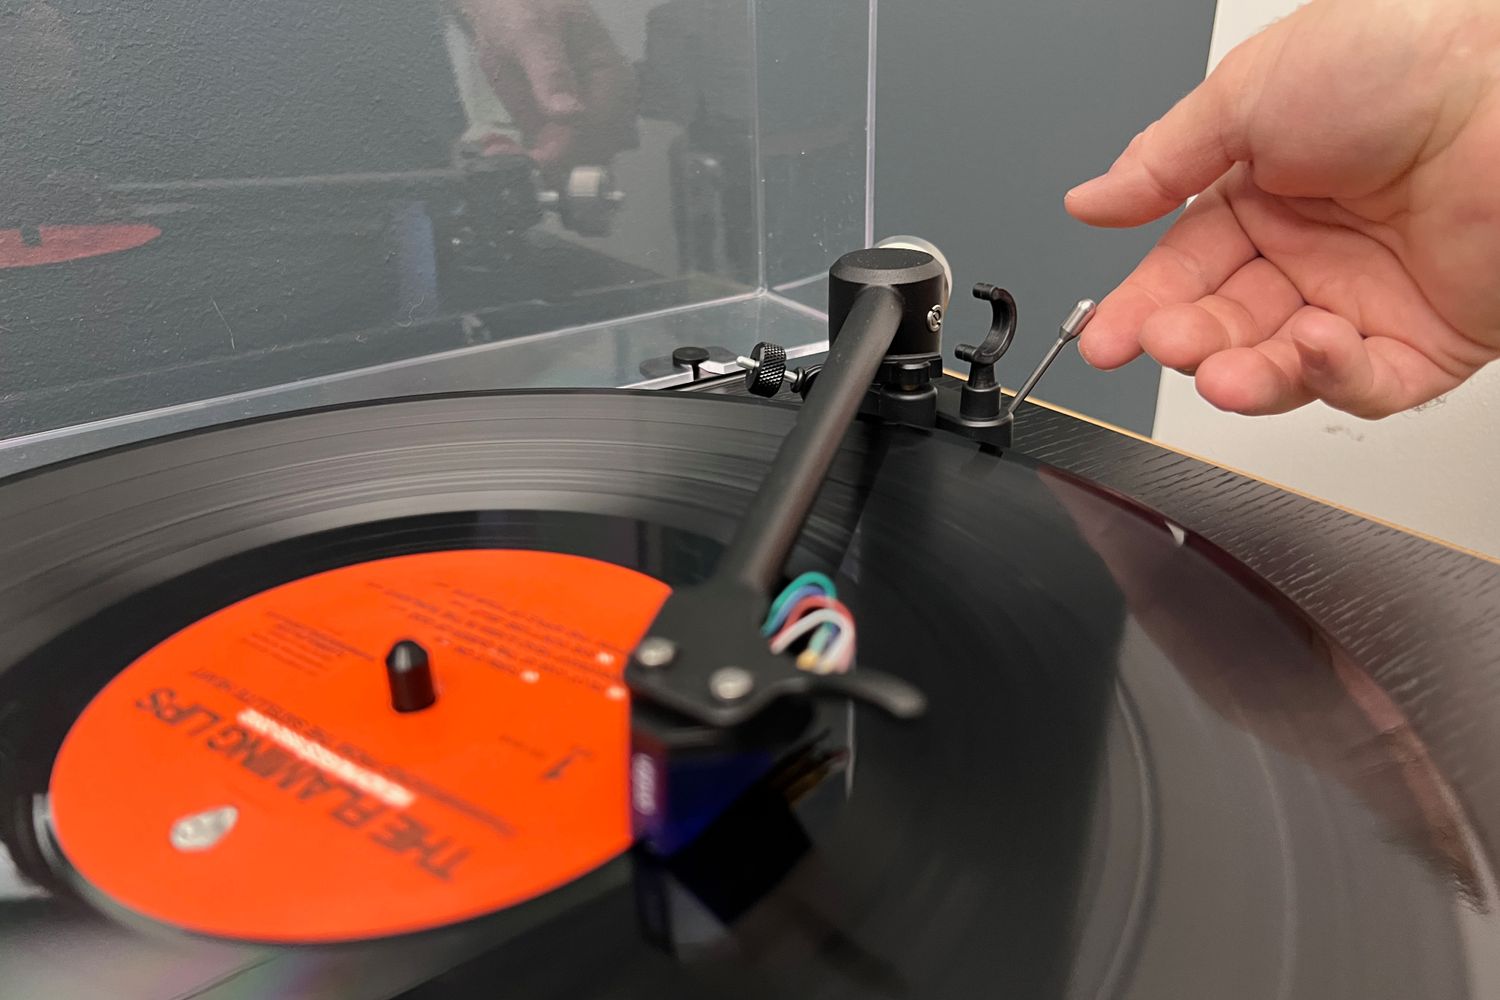 What Is A Cue Lever On A Turntable